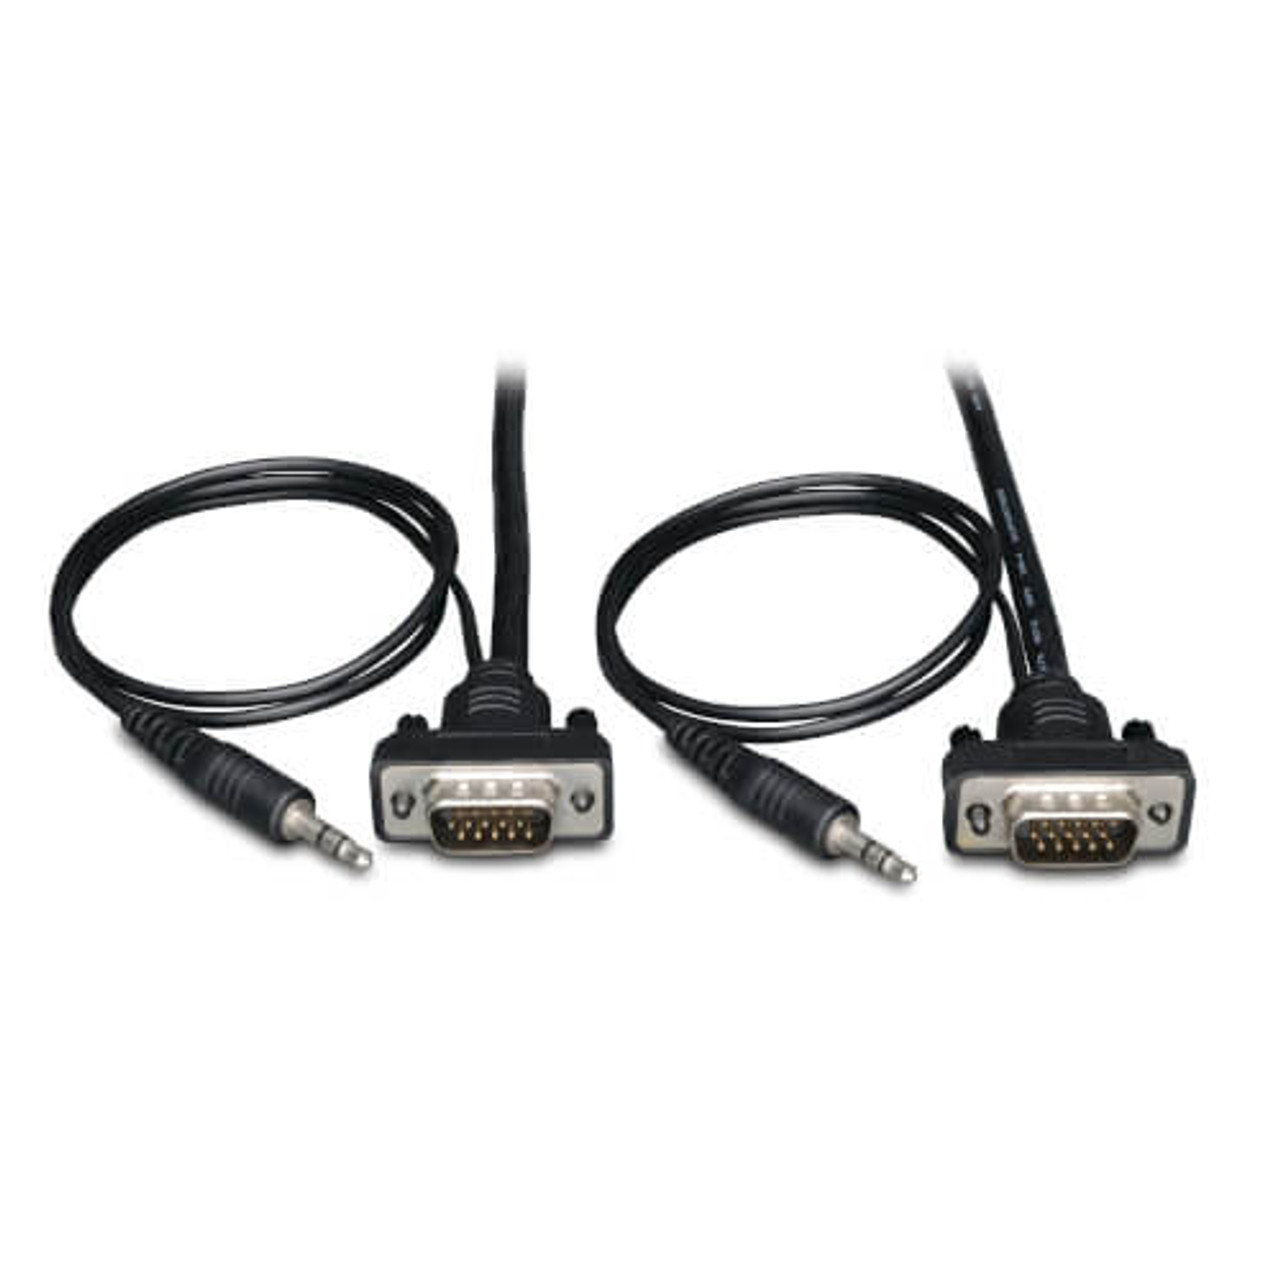 Tripp Lite P512-006 6 ft. VGA Monitor Cable HD-15M to HD-15M Gold Connectors - image 2 of 4